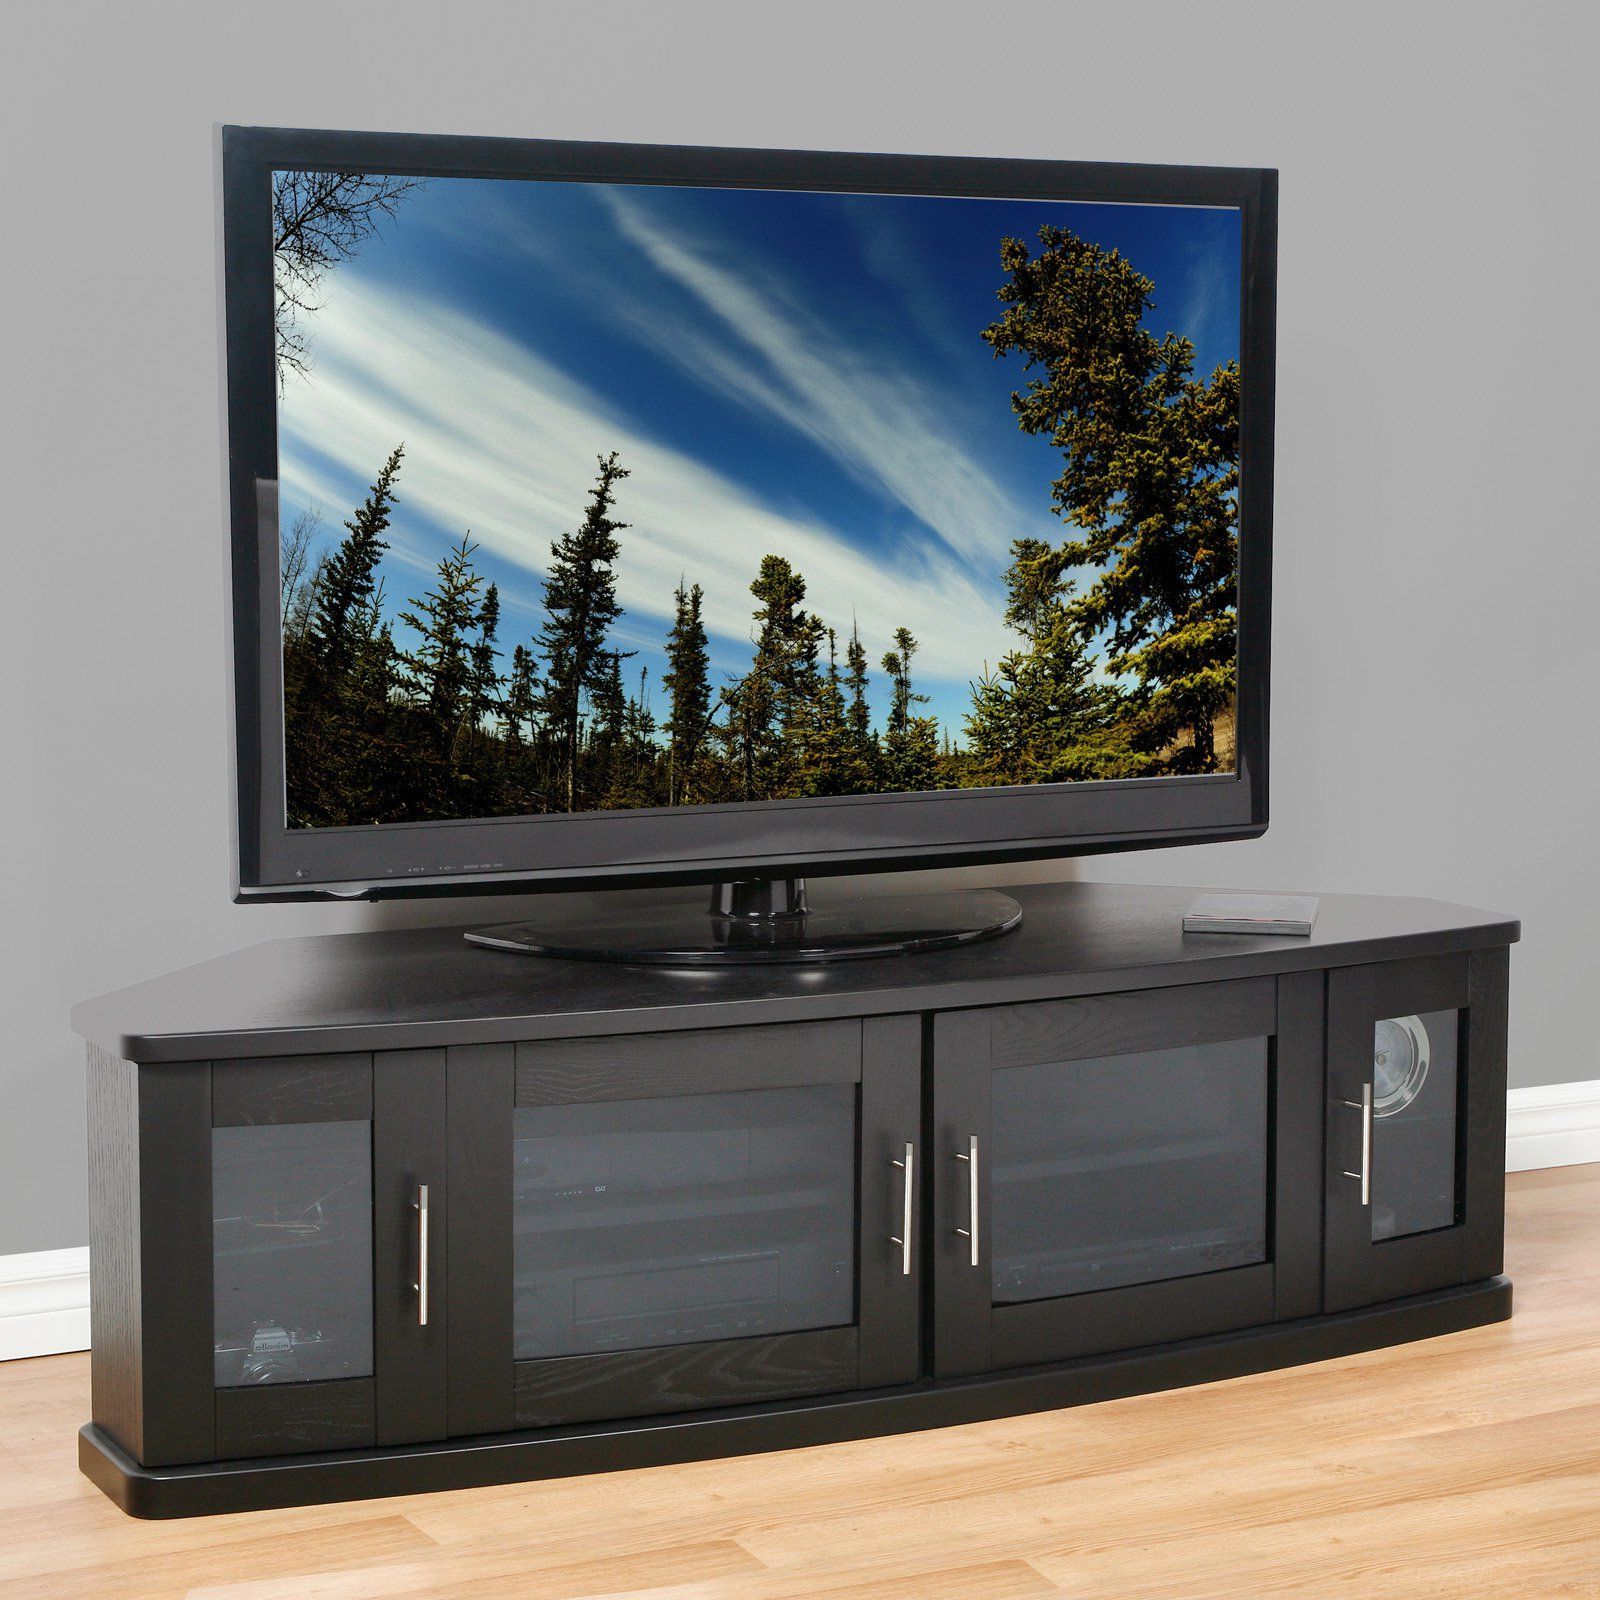 Pinterest For Current Rustic Corner Tv Stands (View 11 of 20)